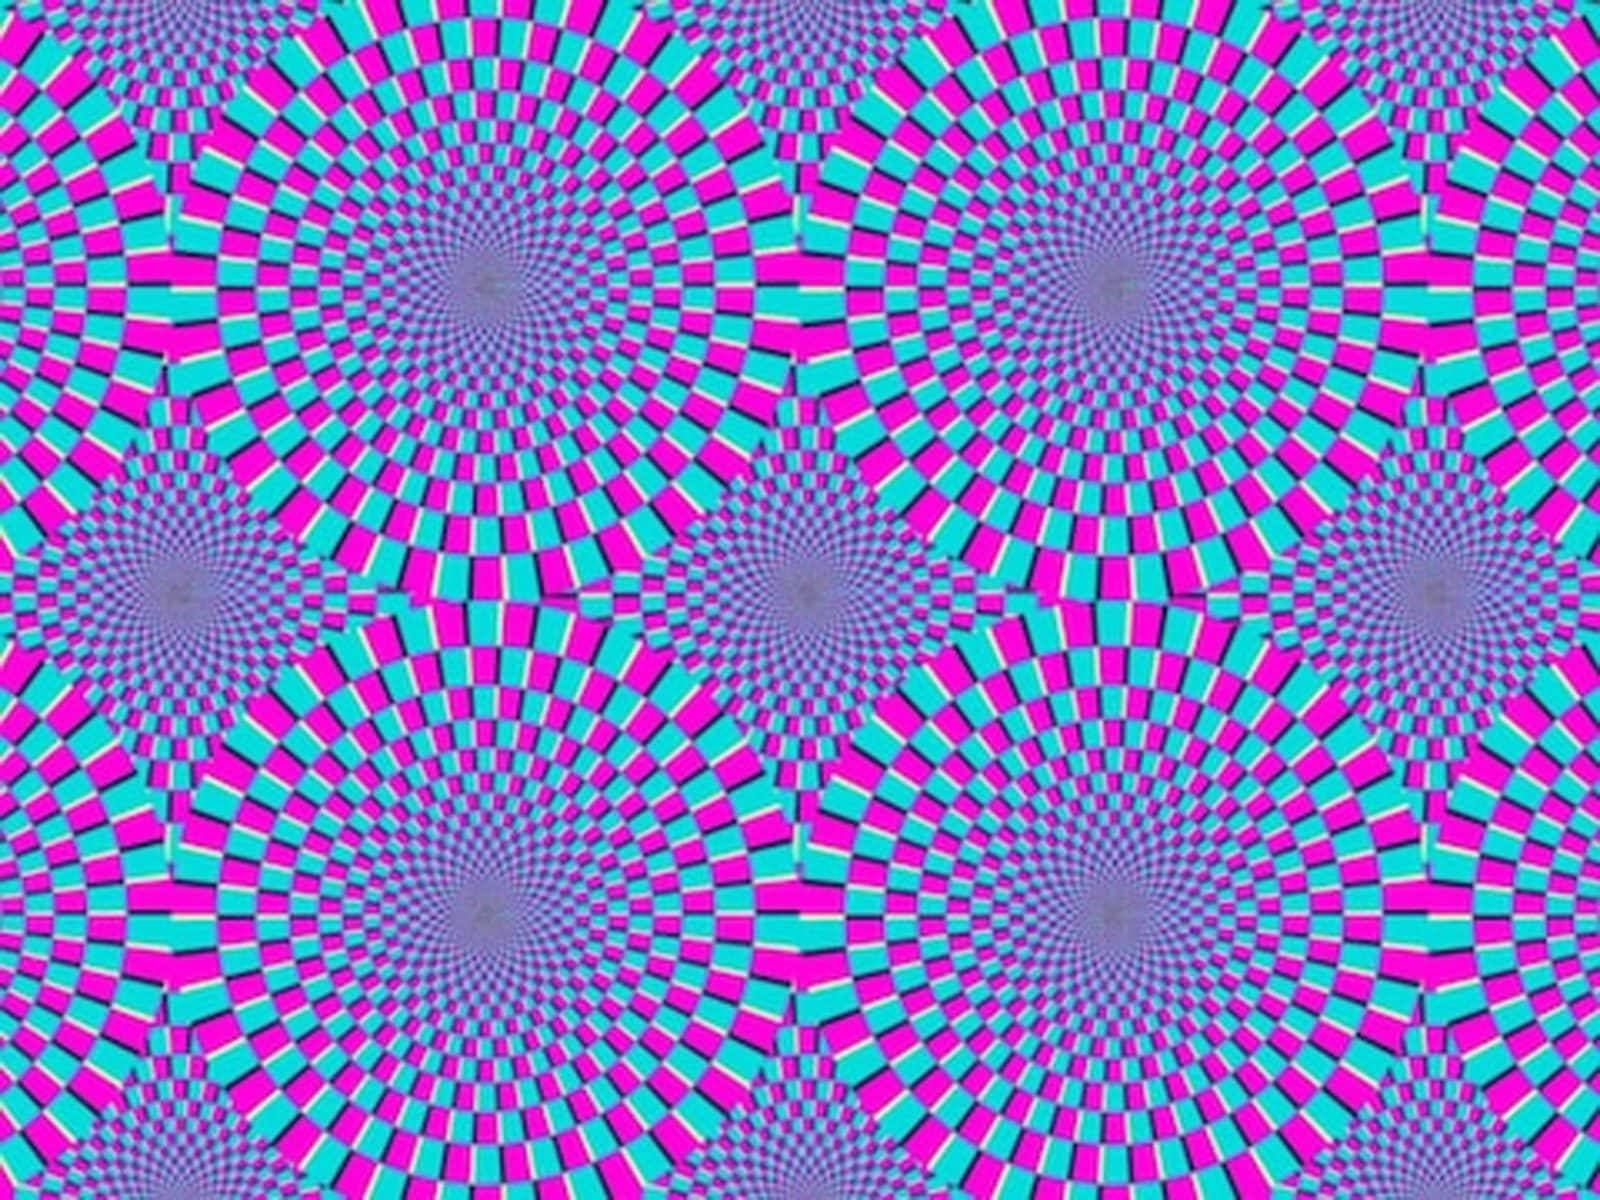 Optical Illusion Art: What You See Is Not What You Get